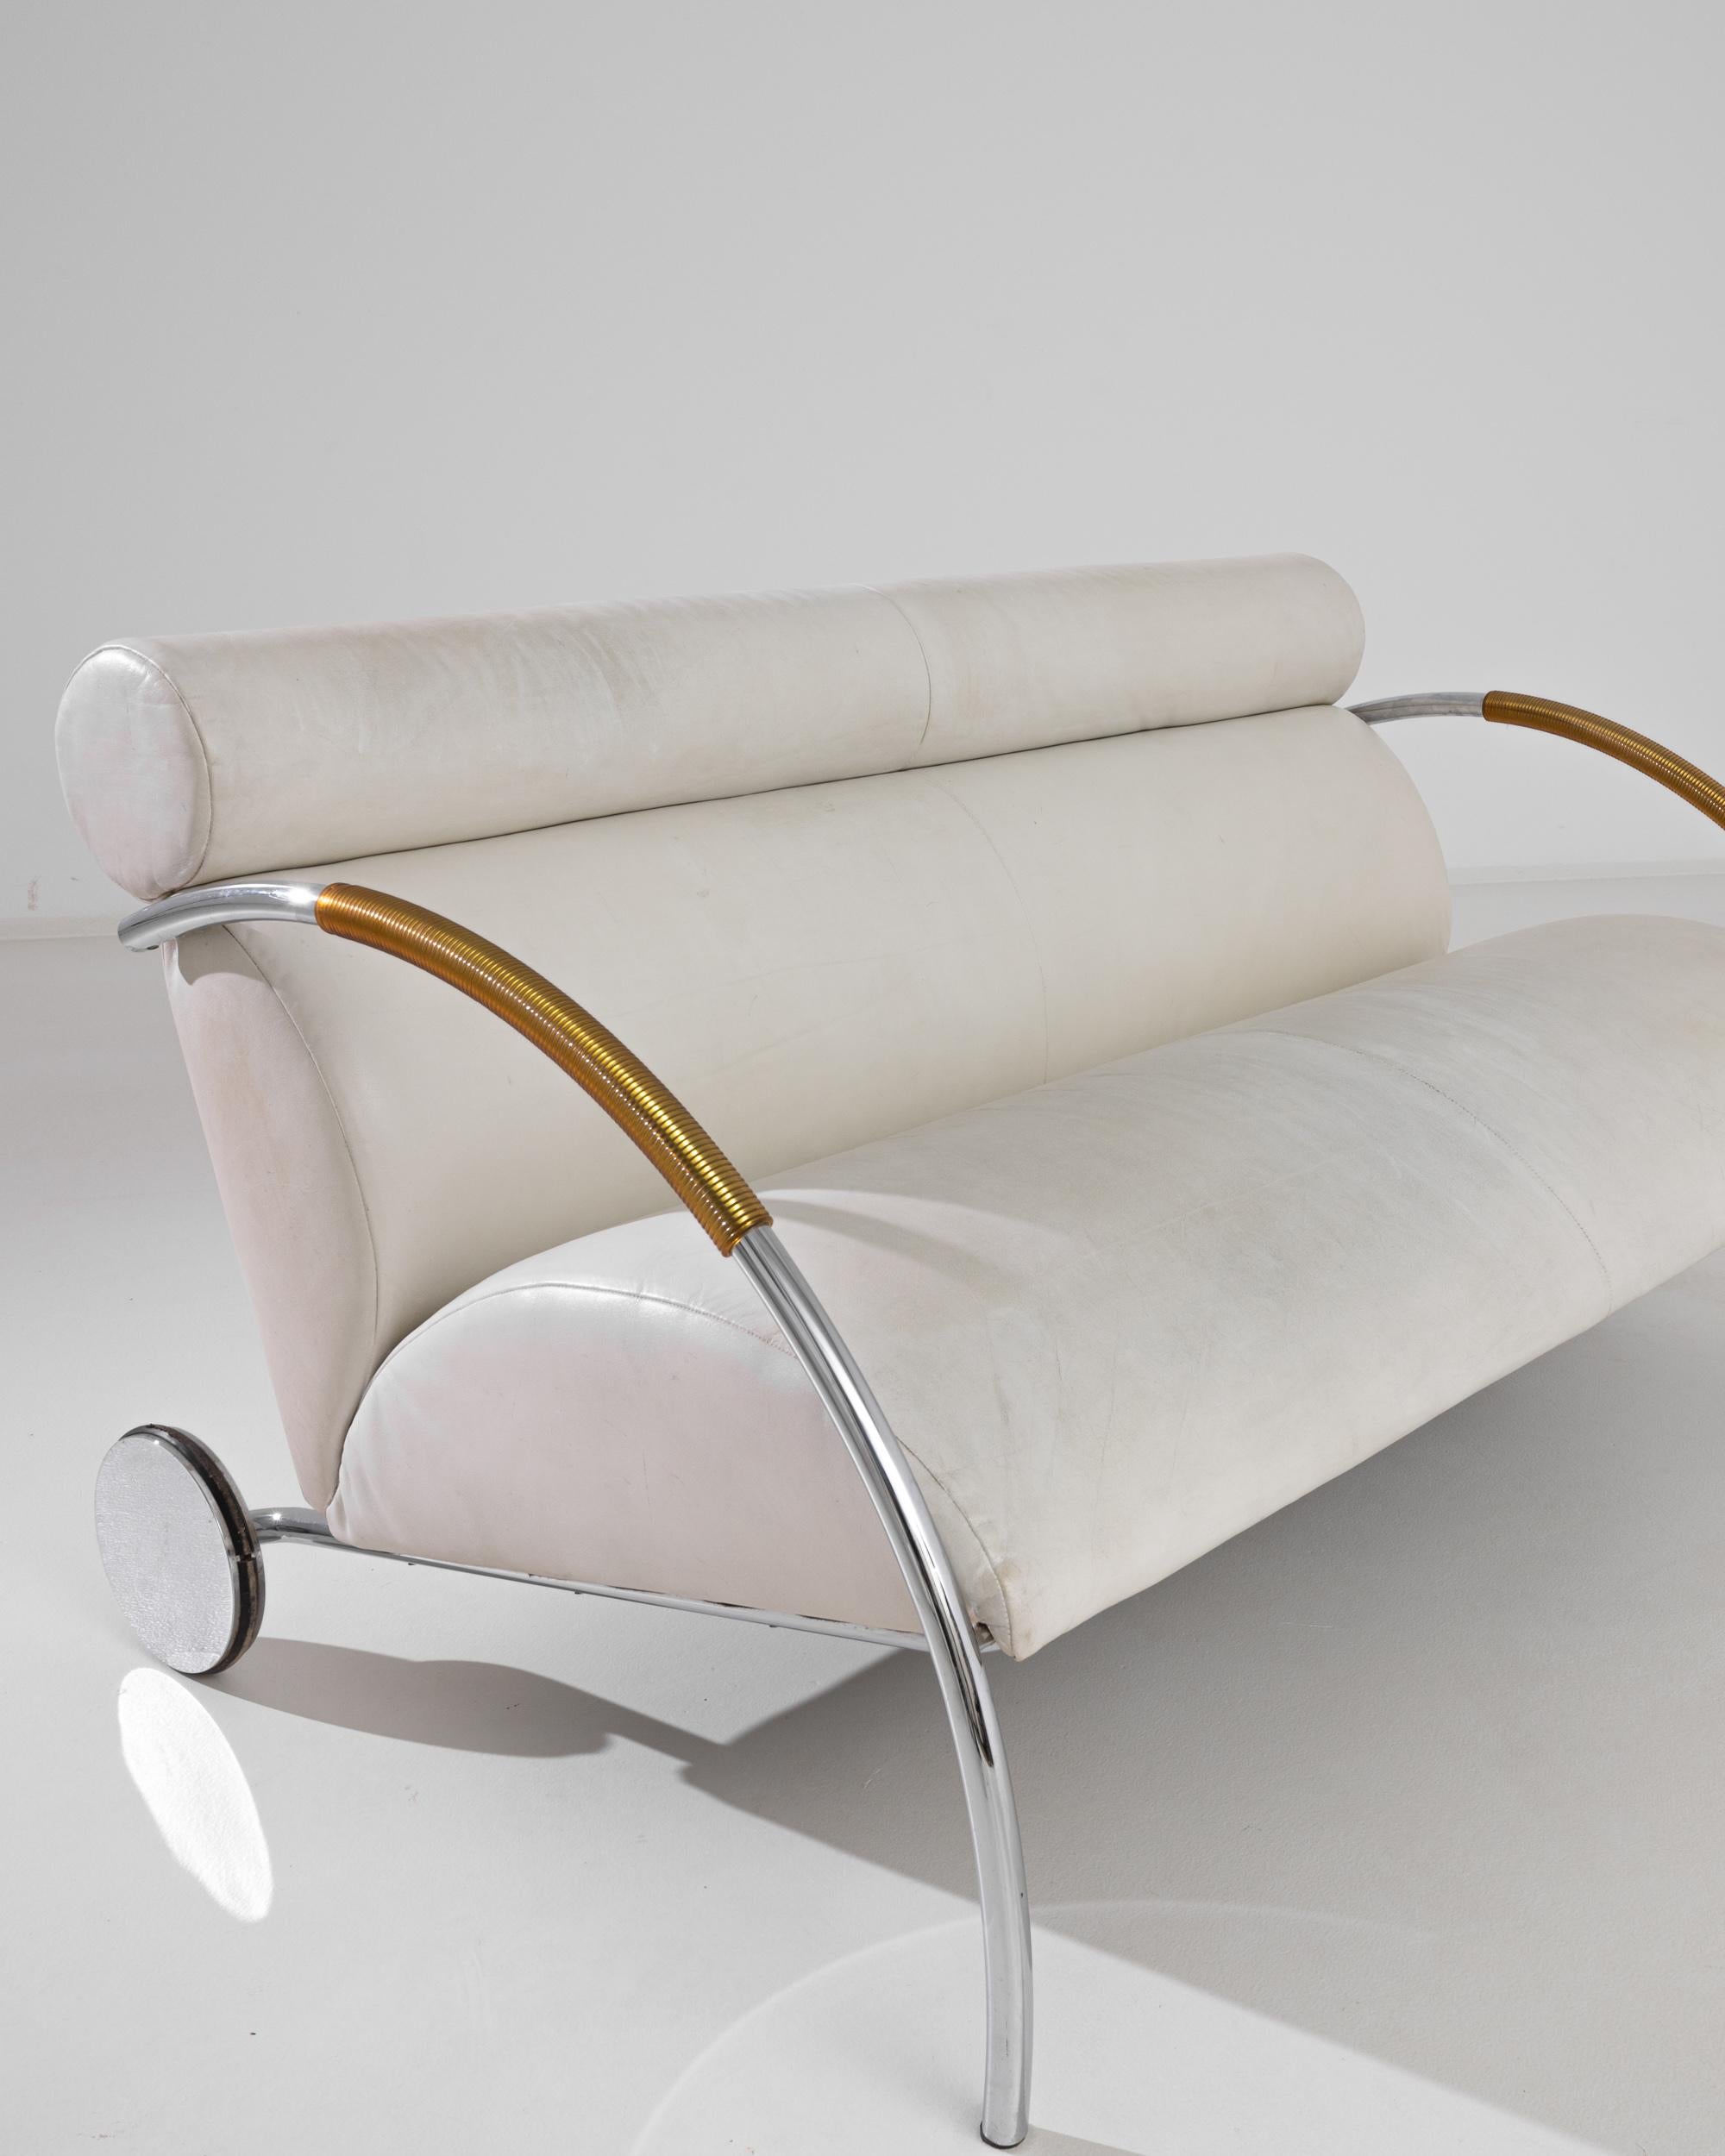 Late 20th Century 1980s, Postmodern Sofa by Peter Maly